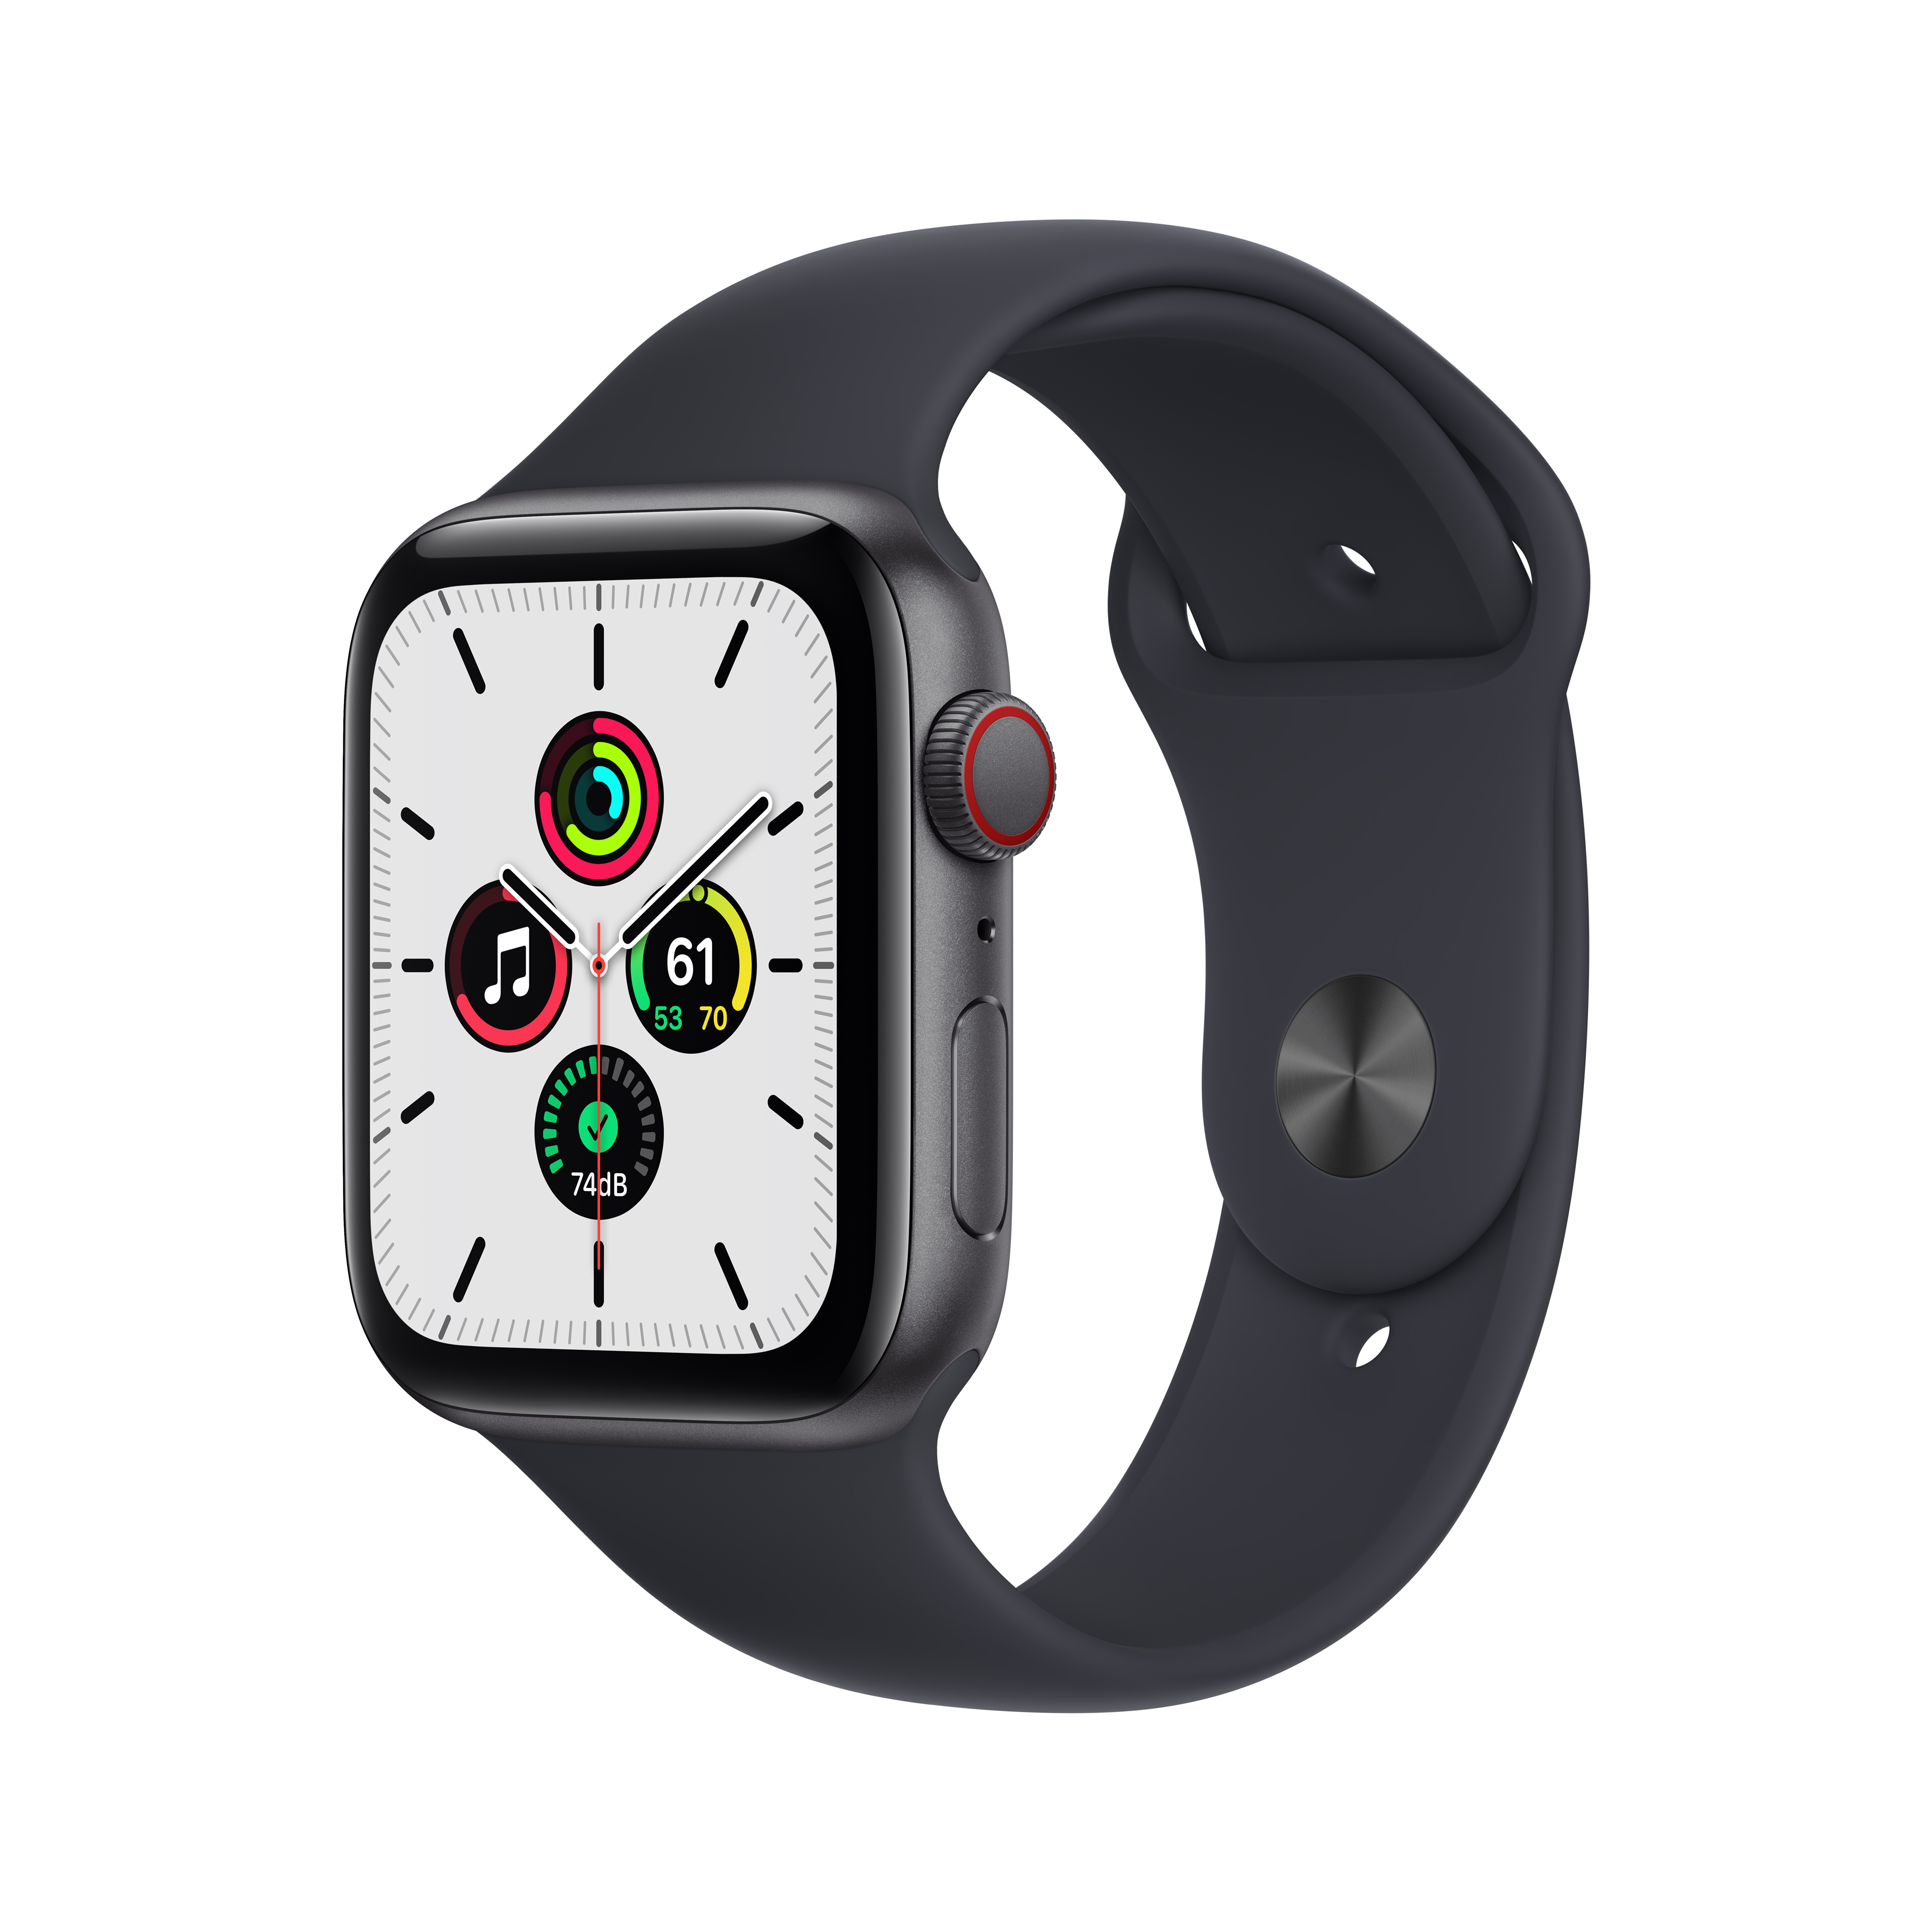 Apple Watch SE (1st Gen) GPS + Cellular 44mm Space Gray Aluminum Case Midnight Sport Band - Regular with Family Set Up - image 1 of 9